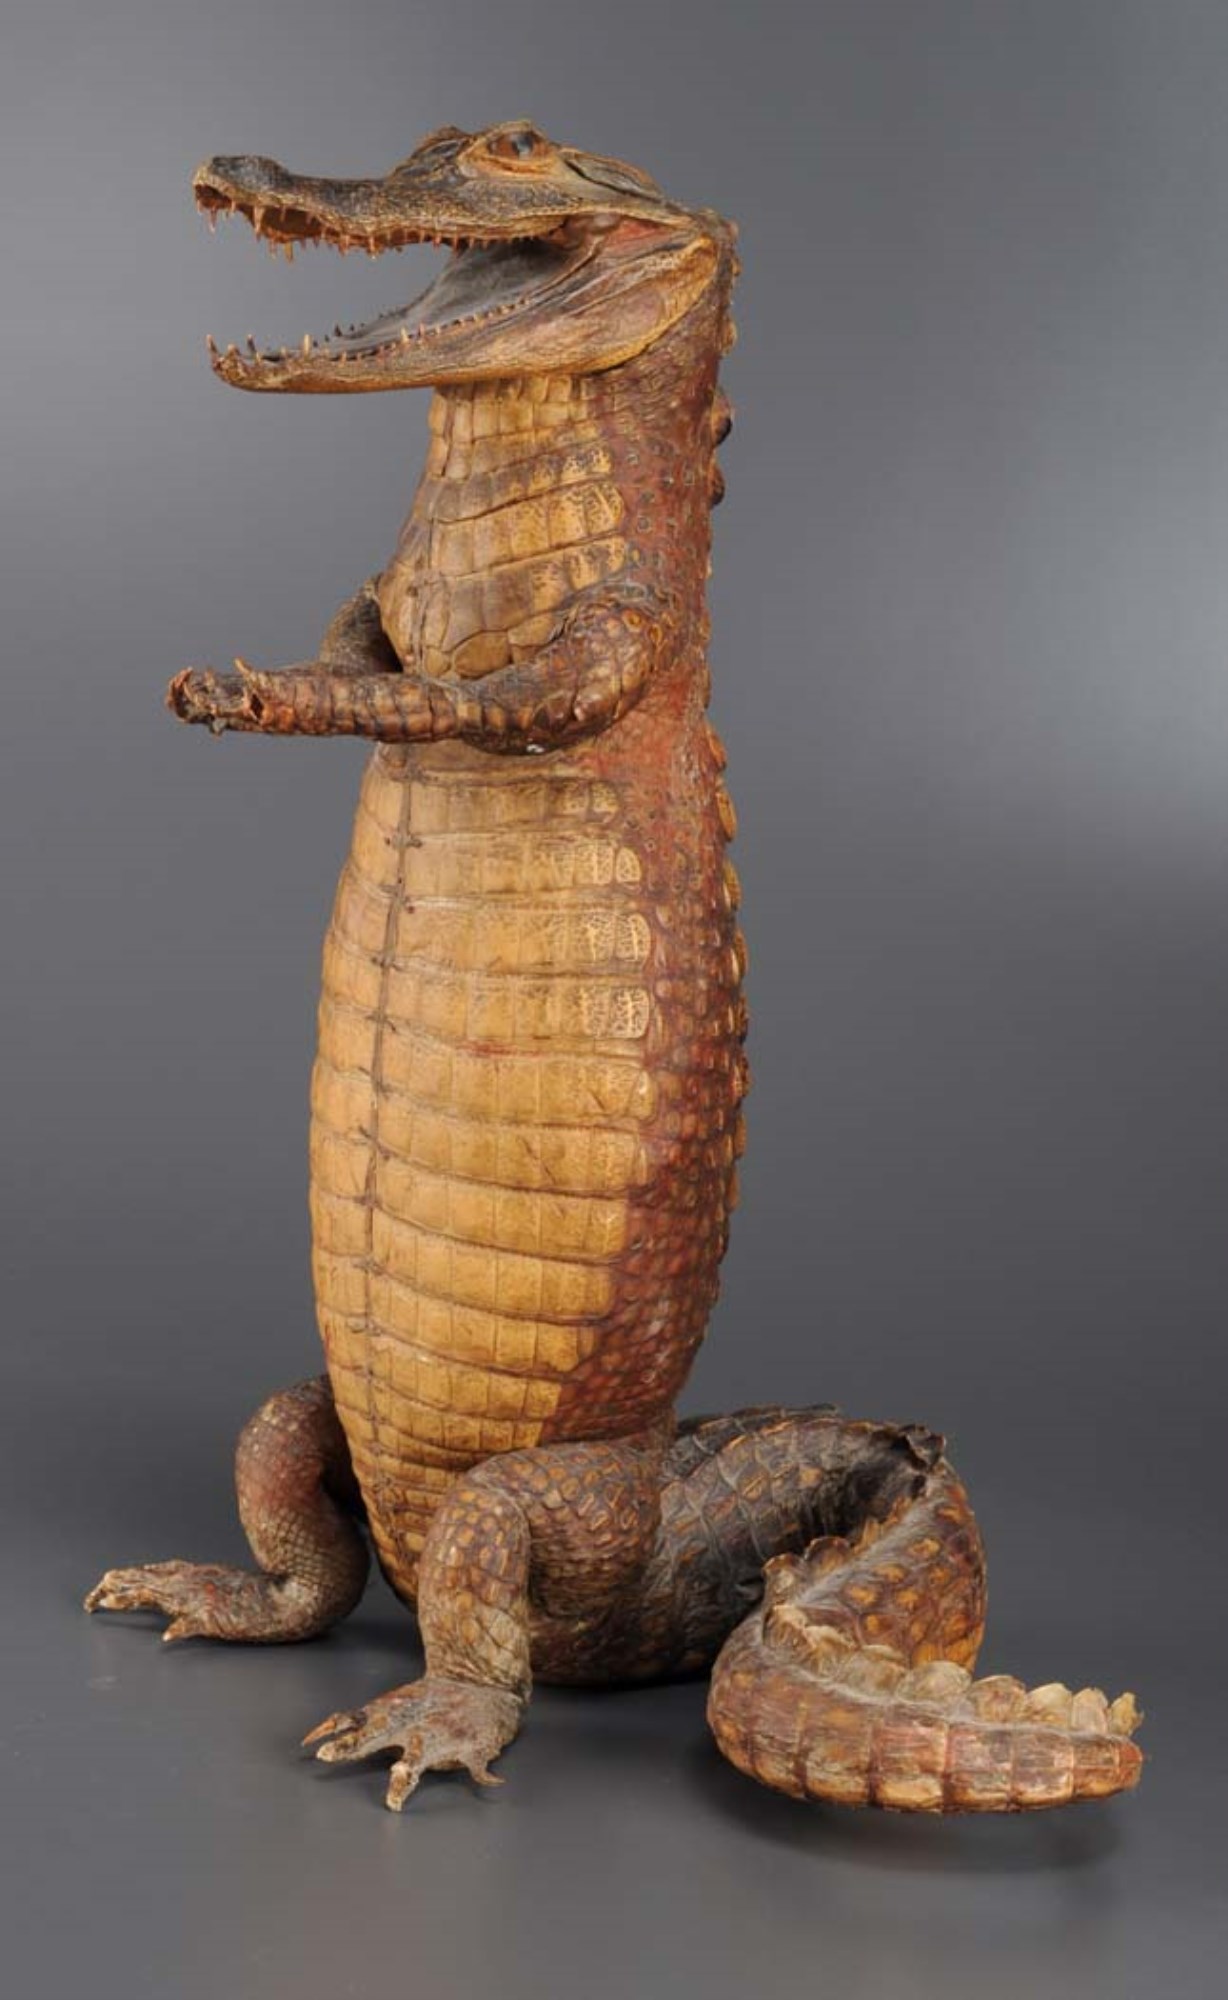 A taxidermy alligator standing on it's hind legs, it's forelegs held in front to take visiting cards